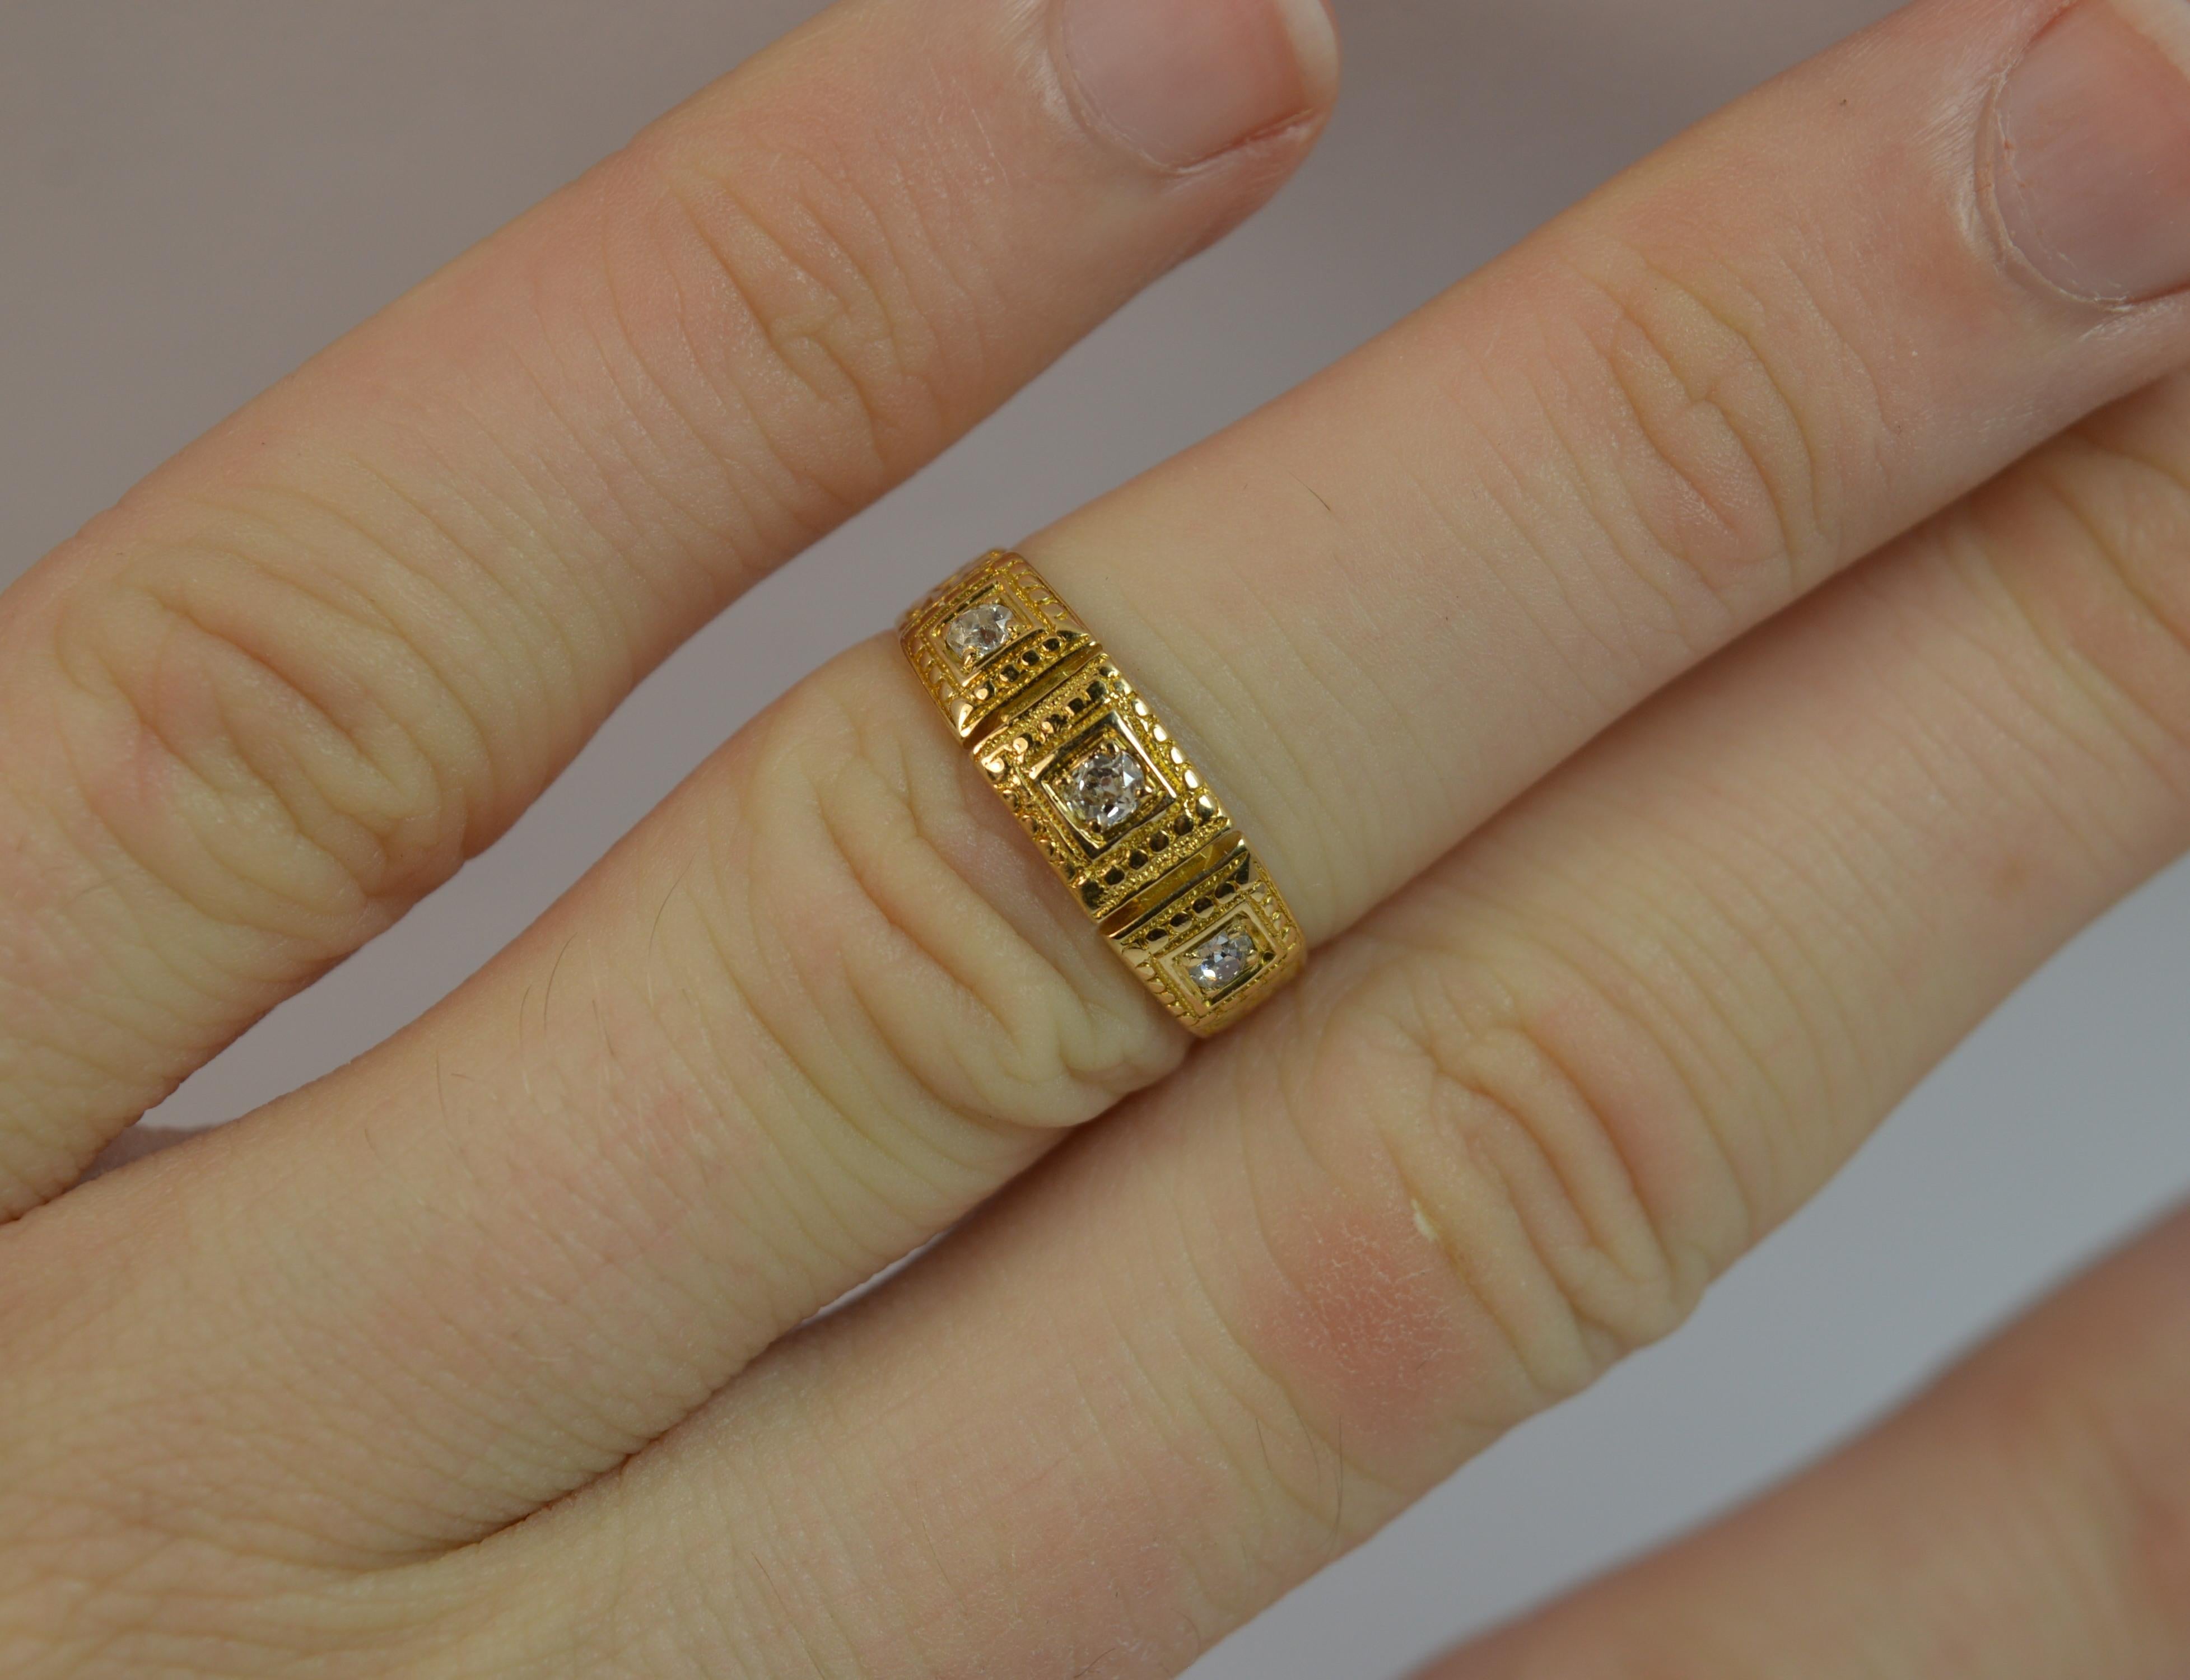 
A LADIES DIAMOND, 18ct GOLD DIAMOND RING, c1870.

SOLID YELLOW GOLD BAND WITH FULL HAND ENGRAVED PATTERN RUNNING THROUGHOUT THE BAND.

15MM X 5.5MM HEAD OF THE THREE  DIAMONDS.

THREE OLD EUROPEAN CUT DIAMONDS.

SIZE K 1/2 UK, 5 1/4 US. 2.7